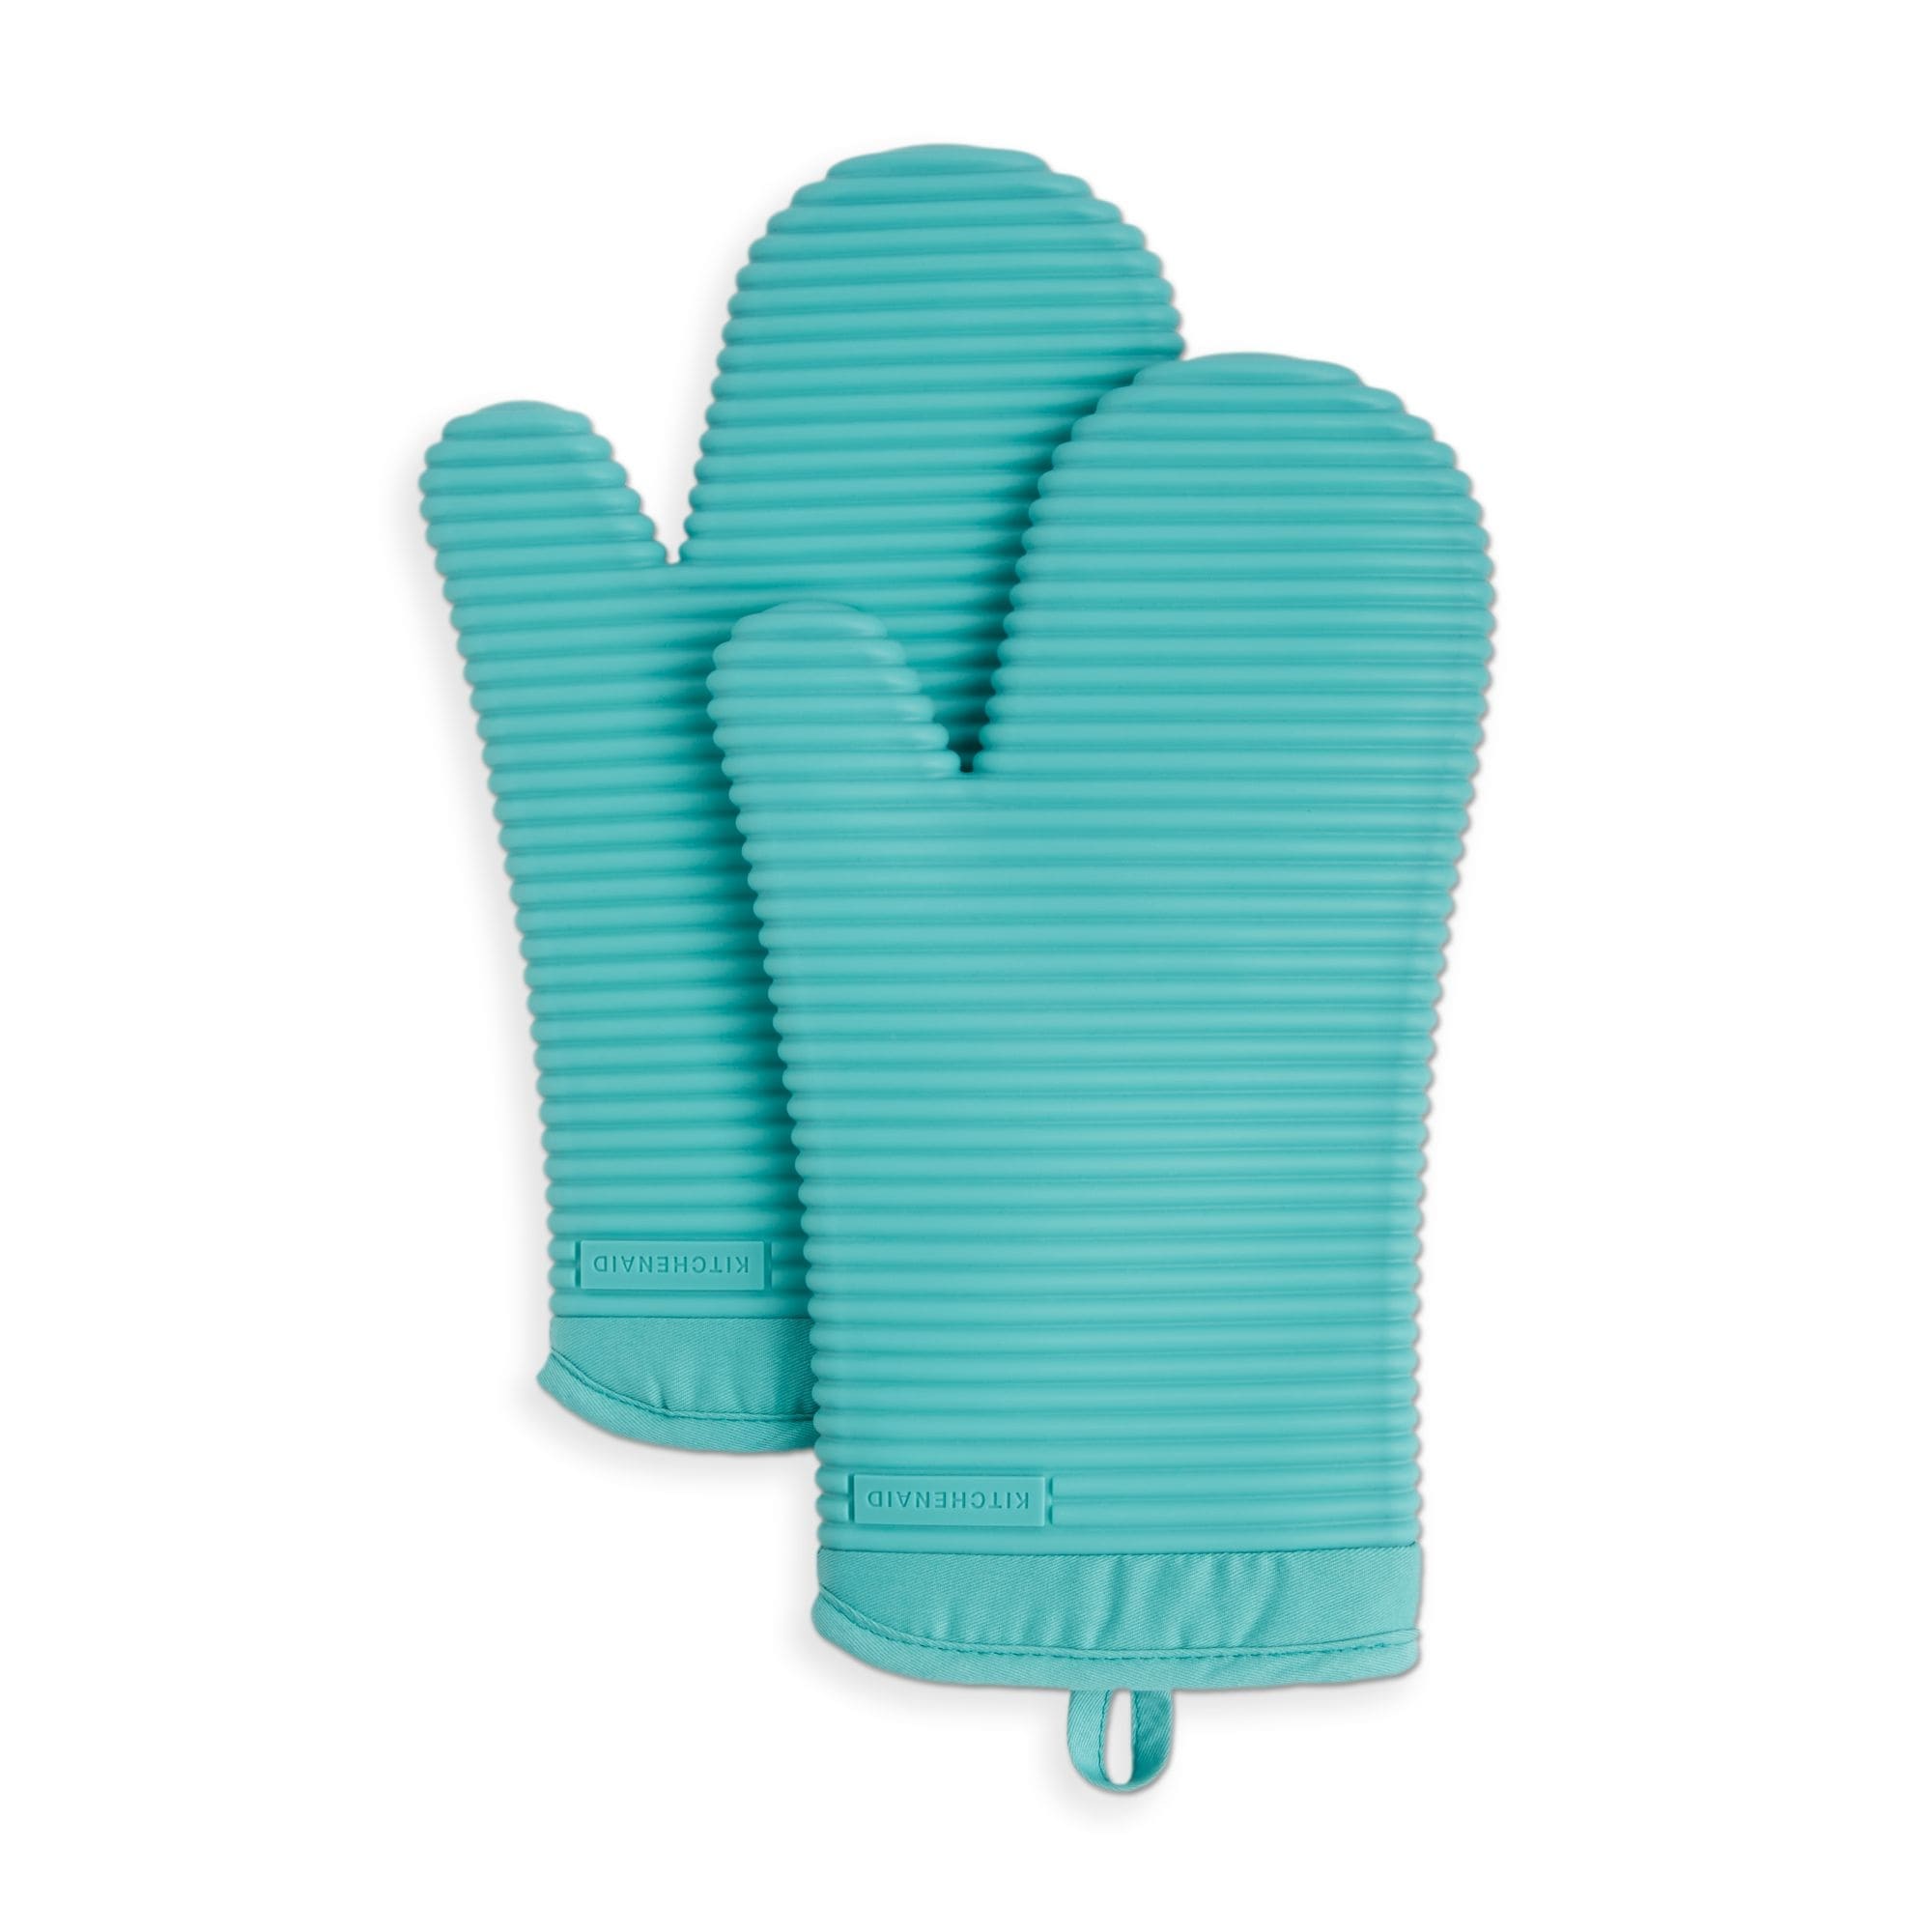 https://ak1.ostkcdn.com/images/products/is/images/direct/1310765bc841b2dbd5842c535dcef816360d99df/KitchenAid-Ribbed-Soft-Silicone-Oven-Mitt-Set%2C-Set-of-2.jpg